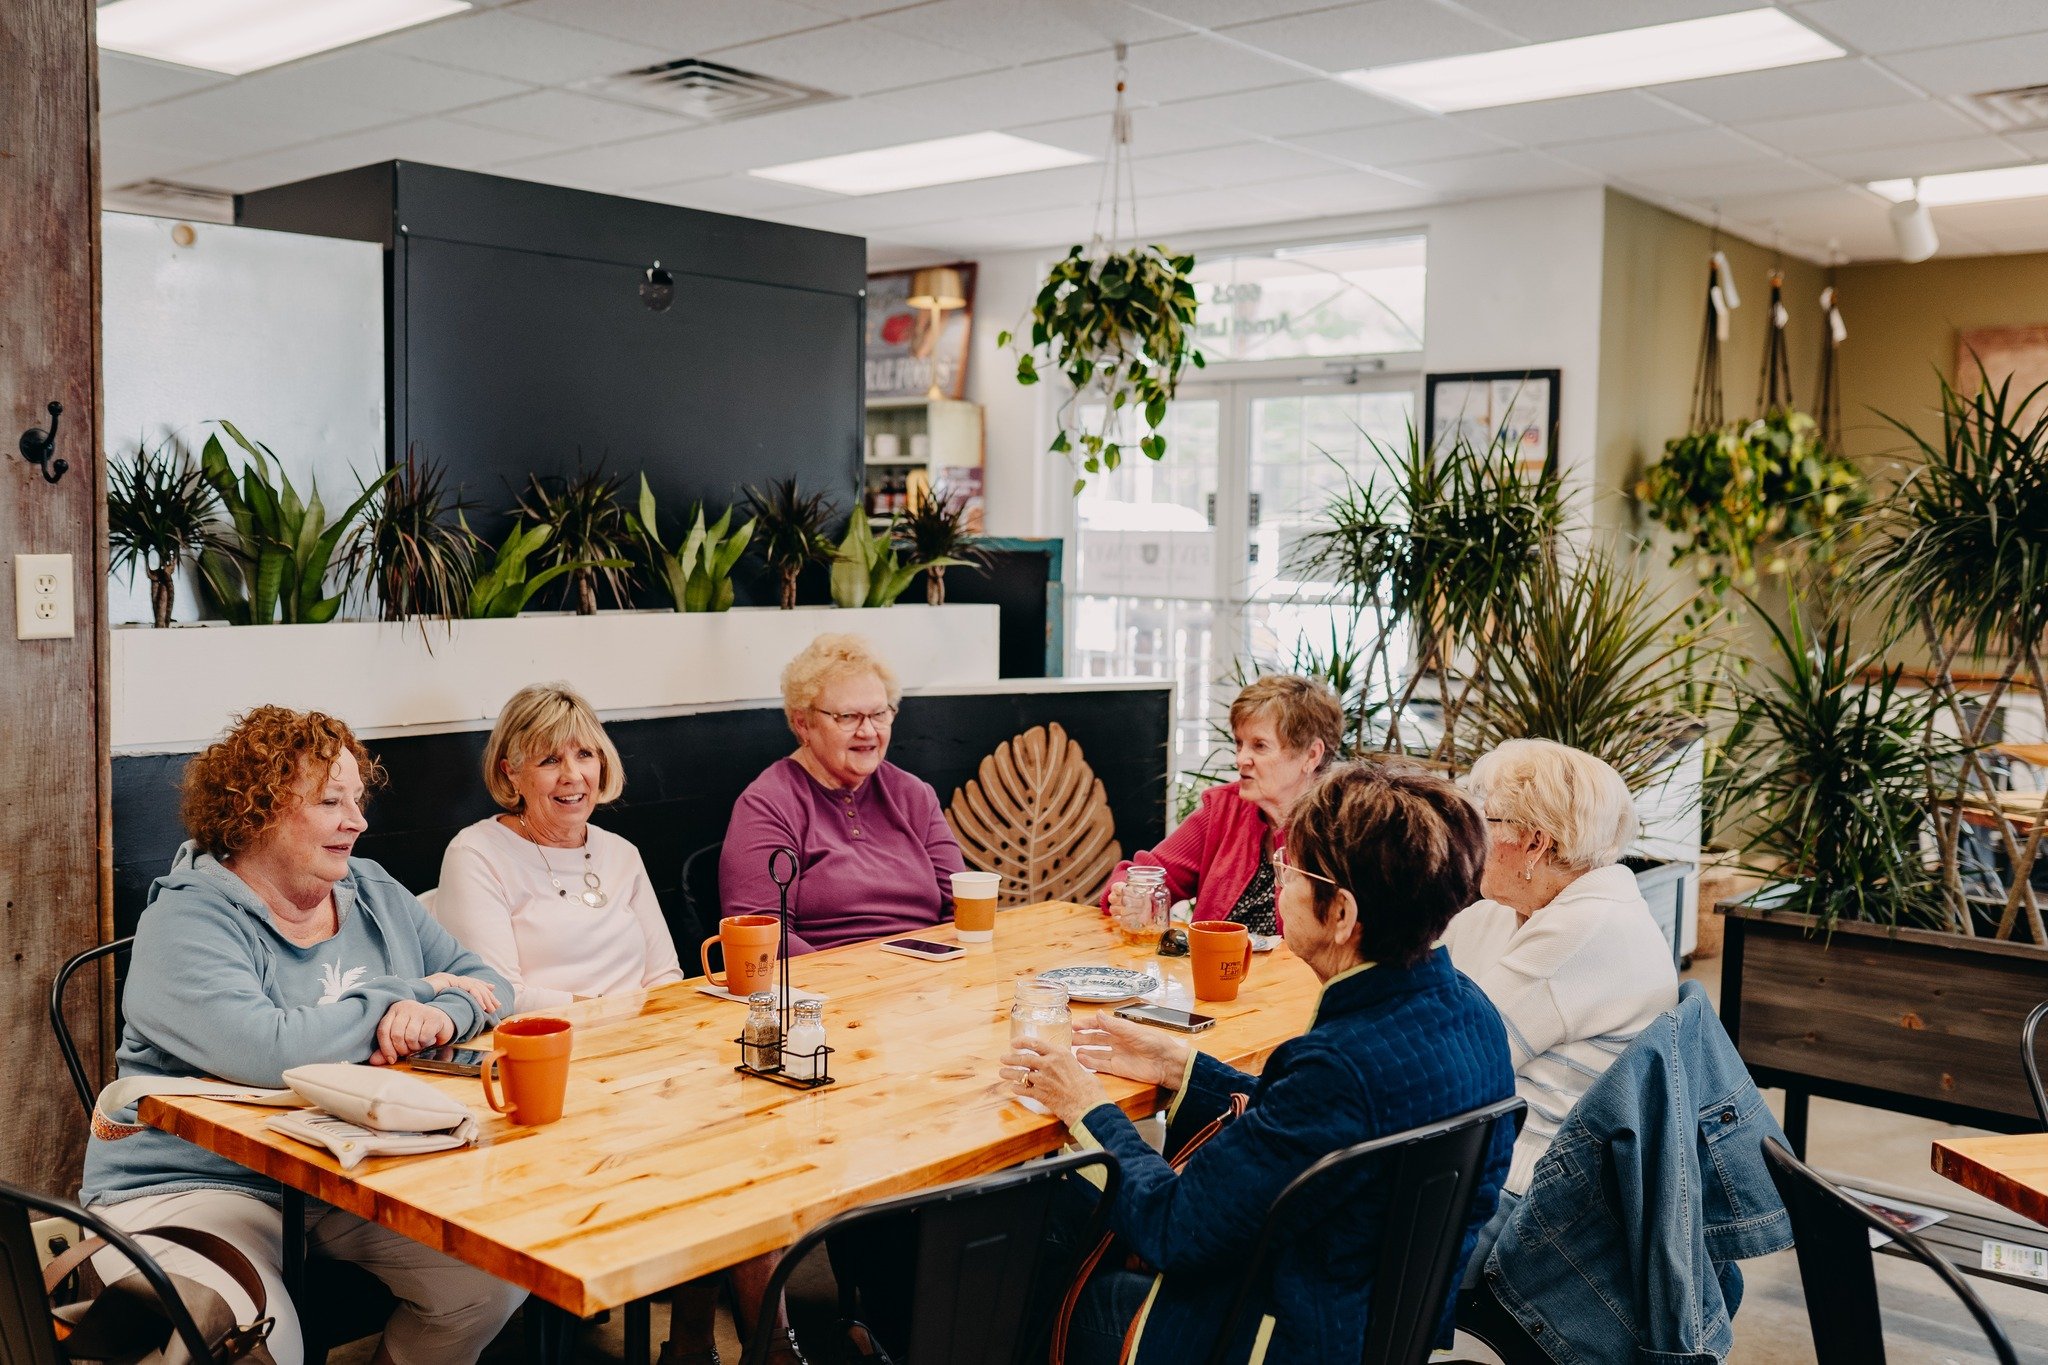 Happy Tuesday!

We have so many friendly faces that visit Five &amp; Two Cafe often! We appreciate you! ❤️

The Cafe is a great place to grab coffee or lunch and meet friends + family! 🥰

#fiveandtwocafe #downtoearth #eauclaire